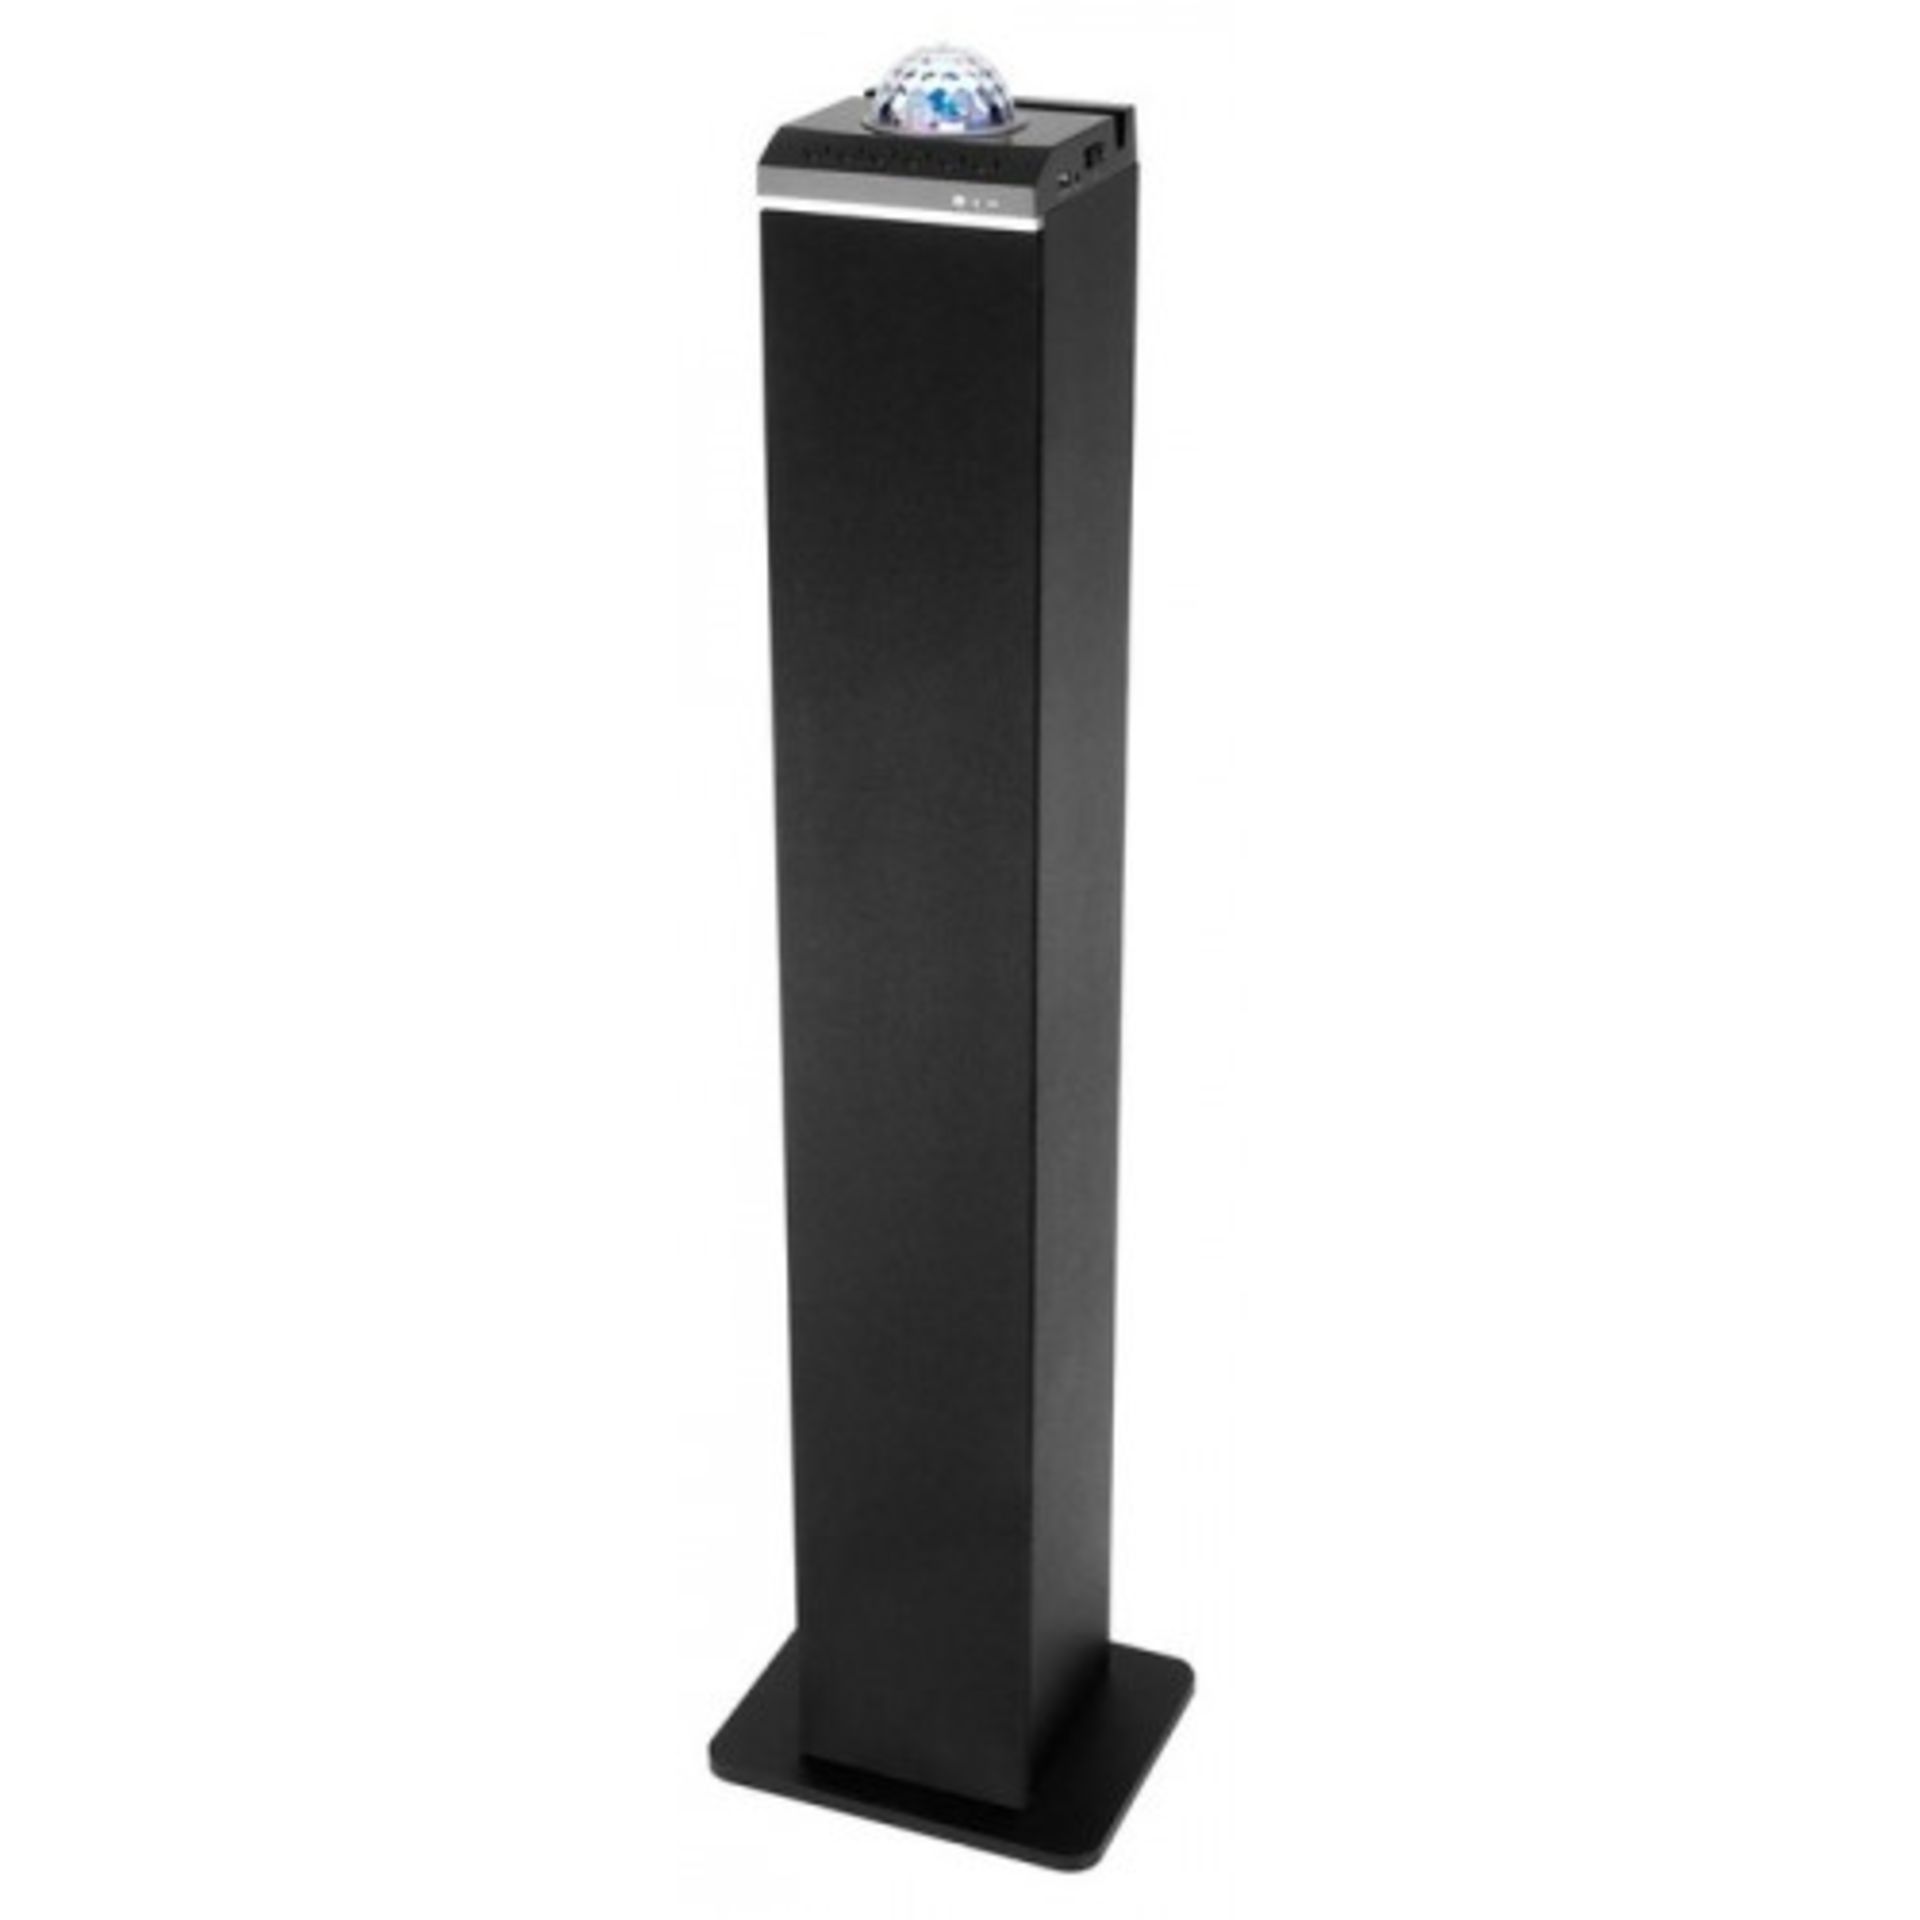 V Brand New Intempo Bluetooth Tower Speaker with Built In Disco Light - 3.5mm Aux Input - 20W Output